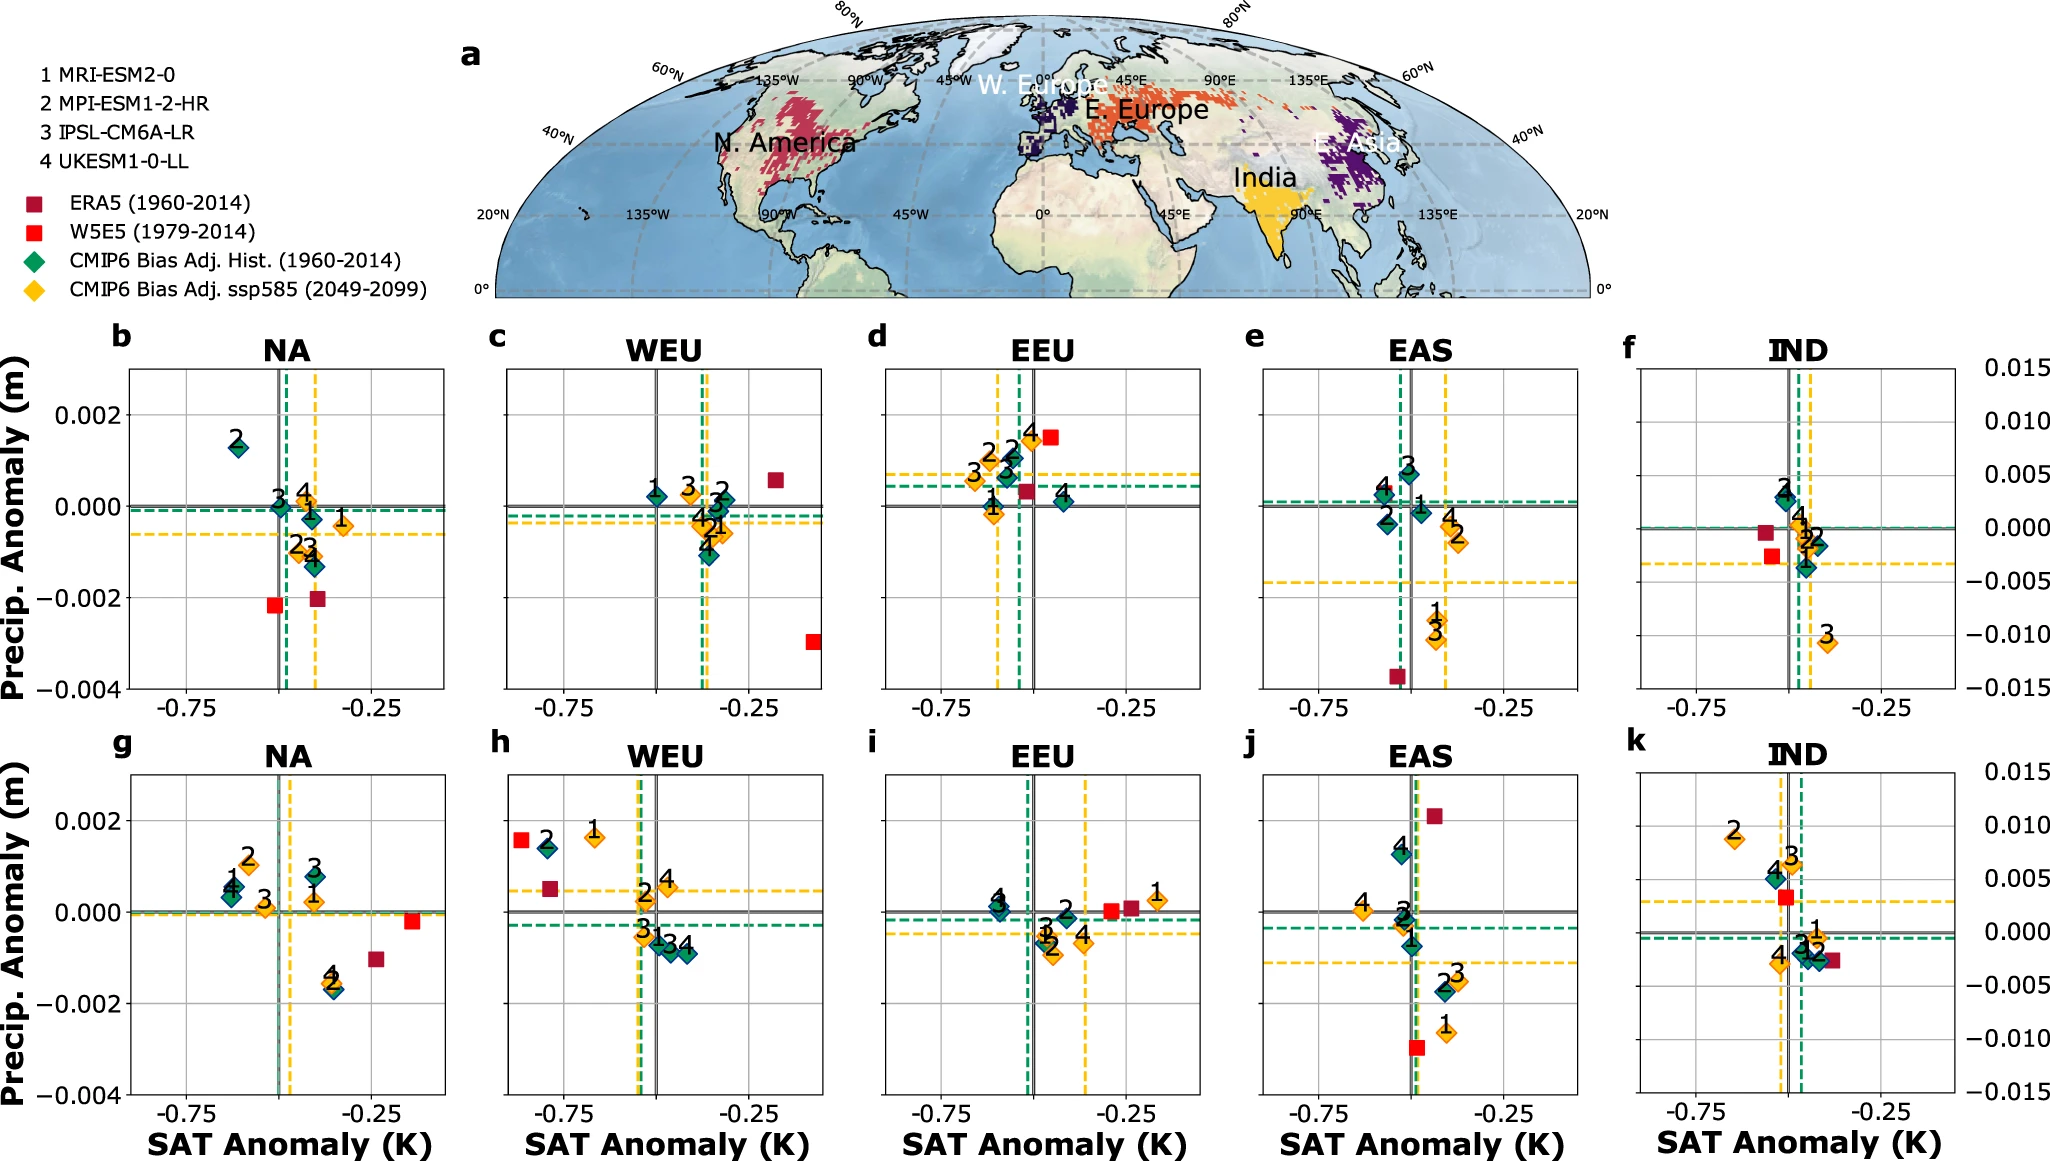 a Major crop producing regions in the Northern Hemisphere mid-latitudes defined by a threshold of 25% harvested area per grid-point. Weekly mean temperature and aggregated precipitation anomalies averaged over the regions outlined in (a) for (b–f) wave-7 and (g–k) for wave-5. We compare two different reanalysis datasets ERA-5 (dark red,1960–2014) and W5E5 (red, 1979–2014) with bias-adjusted output from four CMIP6 models under historical (green, 1960–2014) and future (2045–2099, SSP5-8.5, yellow) conditions, whereas their mean values are shown as dashed lines. Note the different y-axis range for (k) and (f) compared to the other panels. Temperature anomalies are dominantly underestimated in the bias-adjusted output in WEU (wave-7, wave-5), EEU and NA (wave-5). Precipitation anomalies are underestimated in NA, WEU (wave-7). Kornhuber, et al., 2023 / Nature Communications

